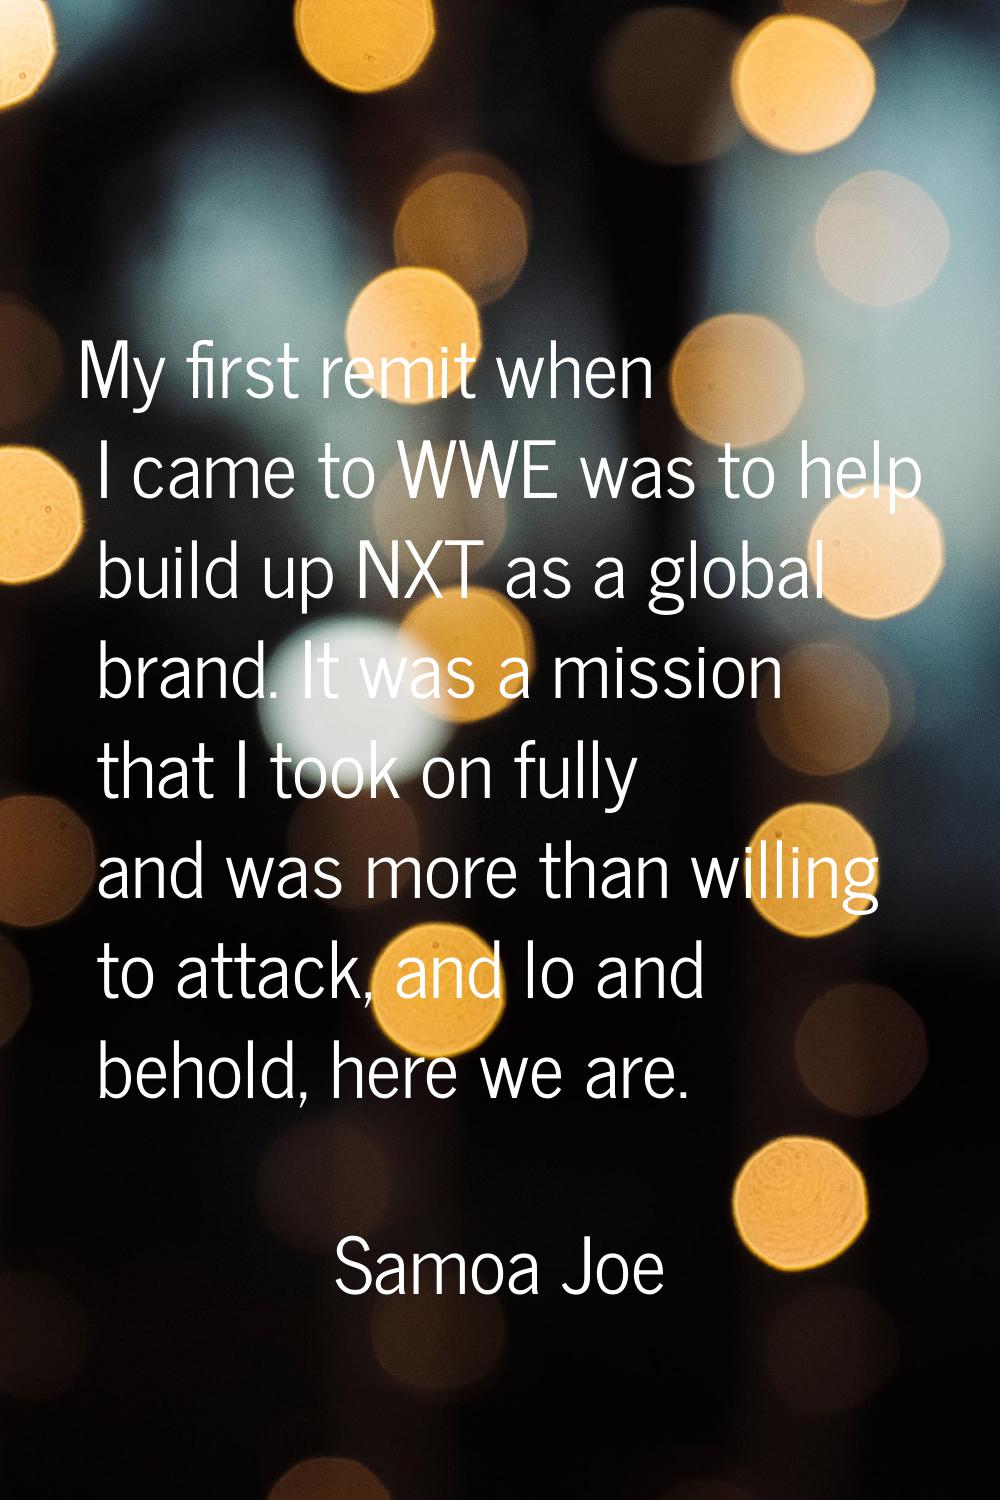 My first remit when I came to WWE was to help build up NXT as a global brand. It was a mission that